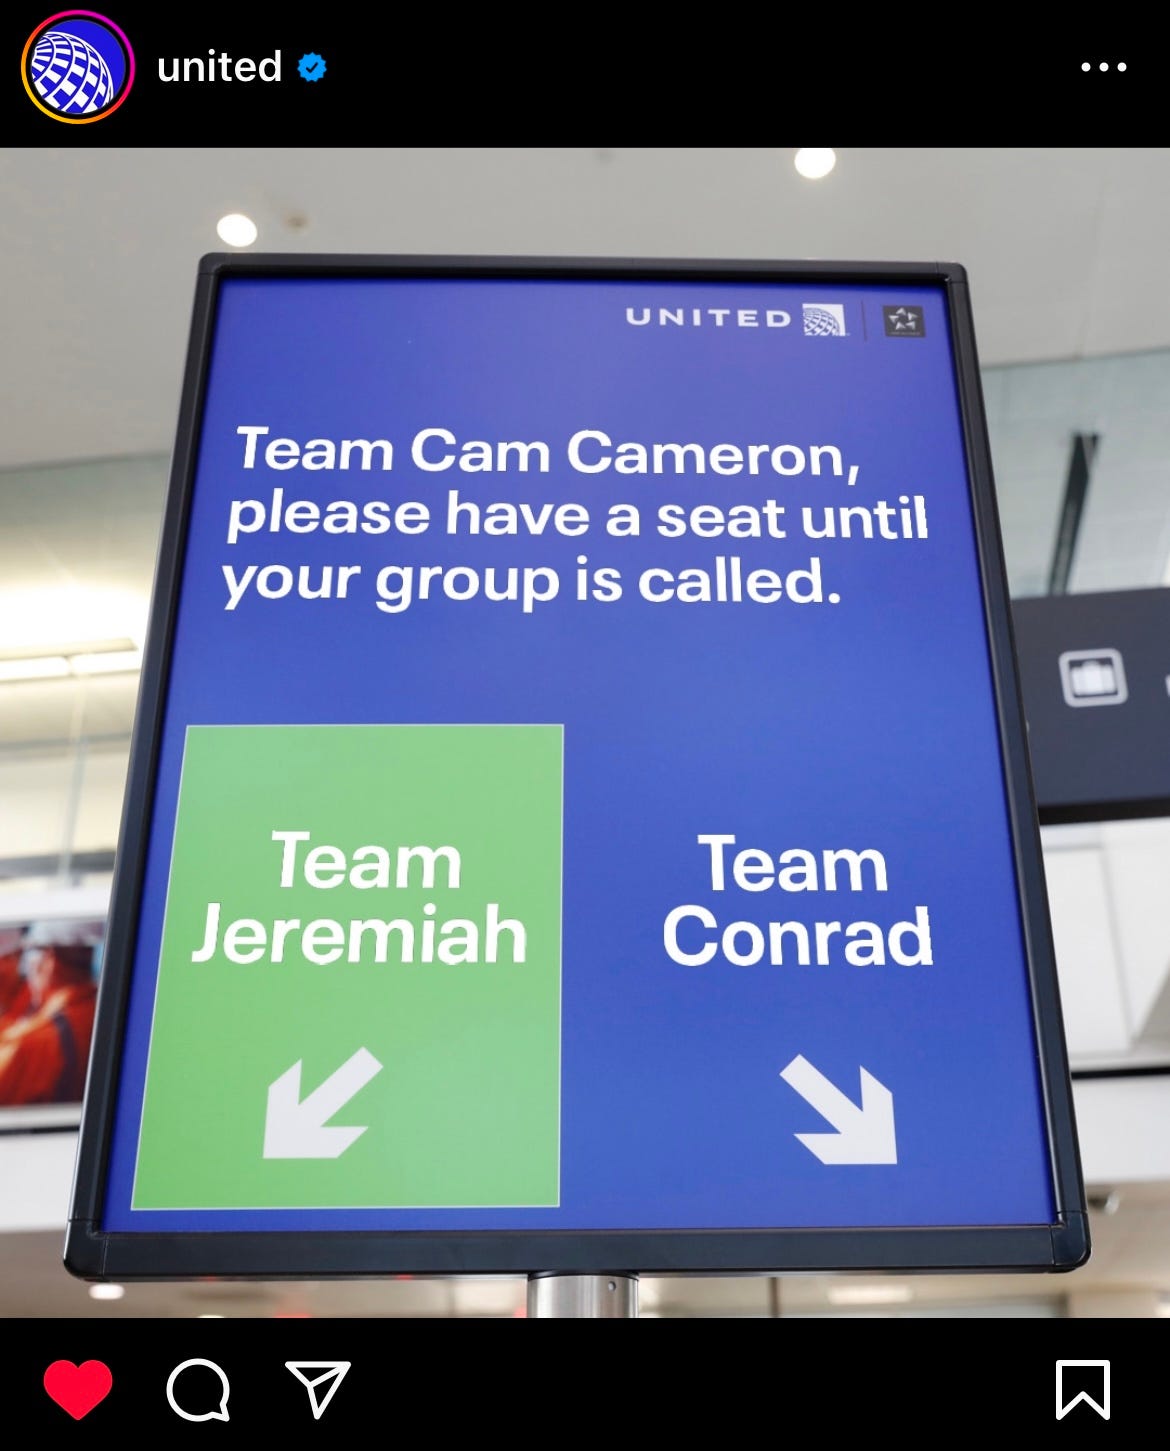 Screenshot of United Airlines' Instagram post that says "Team Cam Cameron, please have a seat until your group is called, and then boarding signs for Team Jeremiah and Team Conrad.